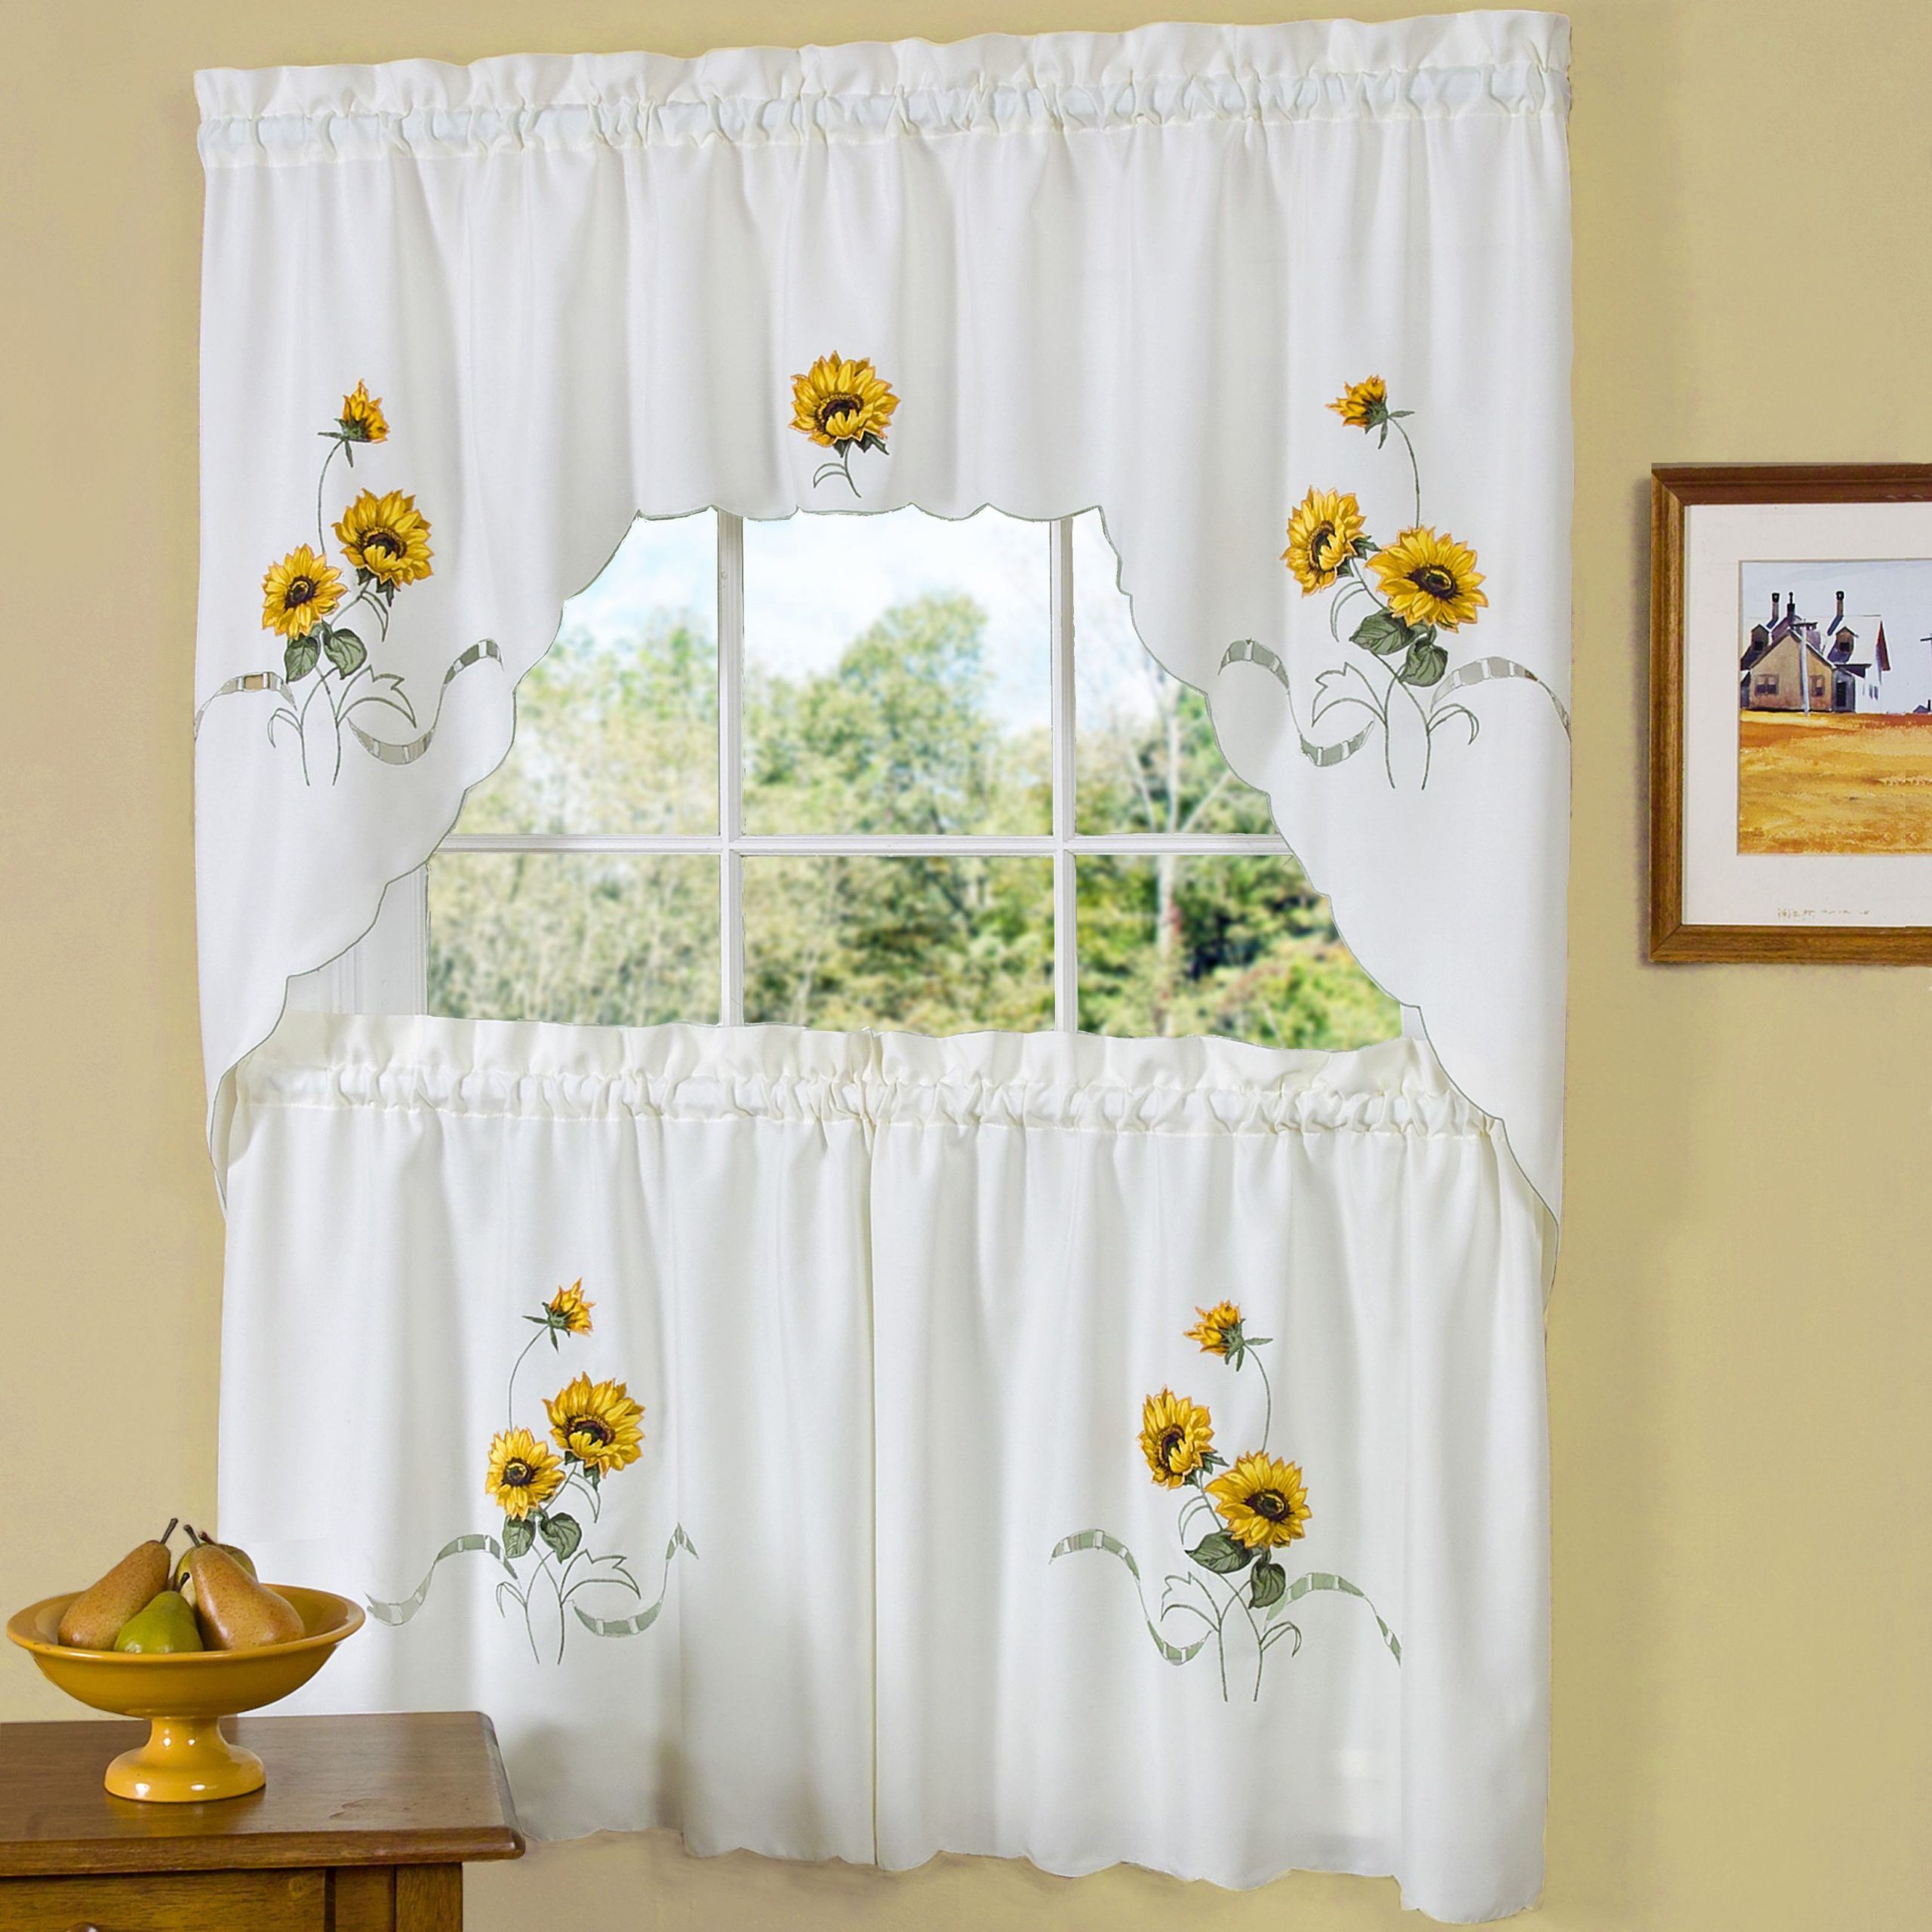 Featured Photo of Traditional Tailored Window Curtains With Embroidered Yellow Sunflowers